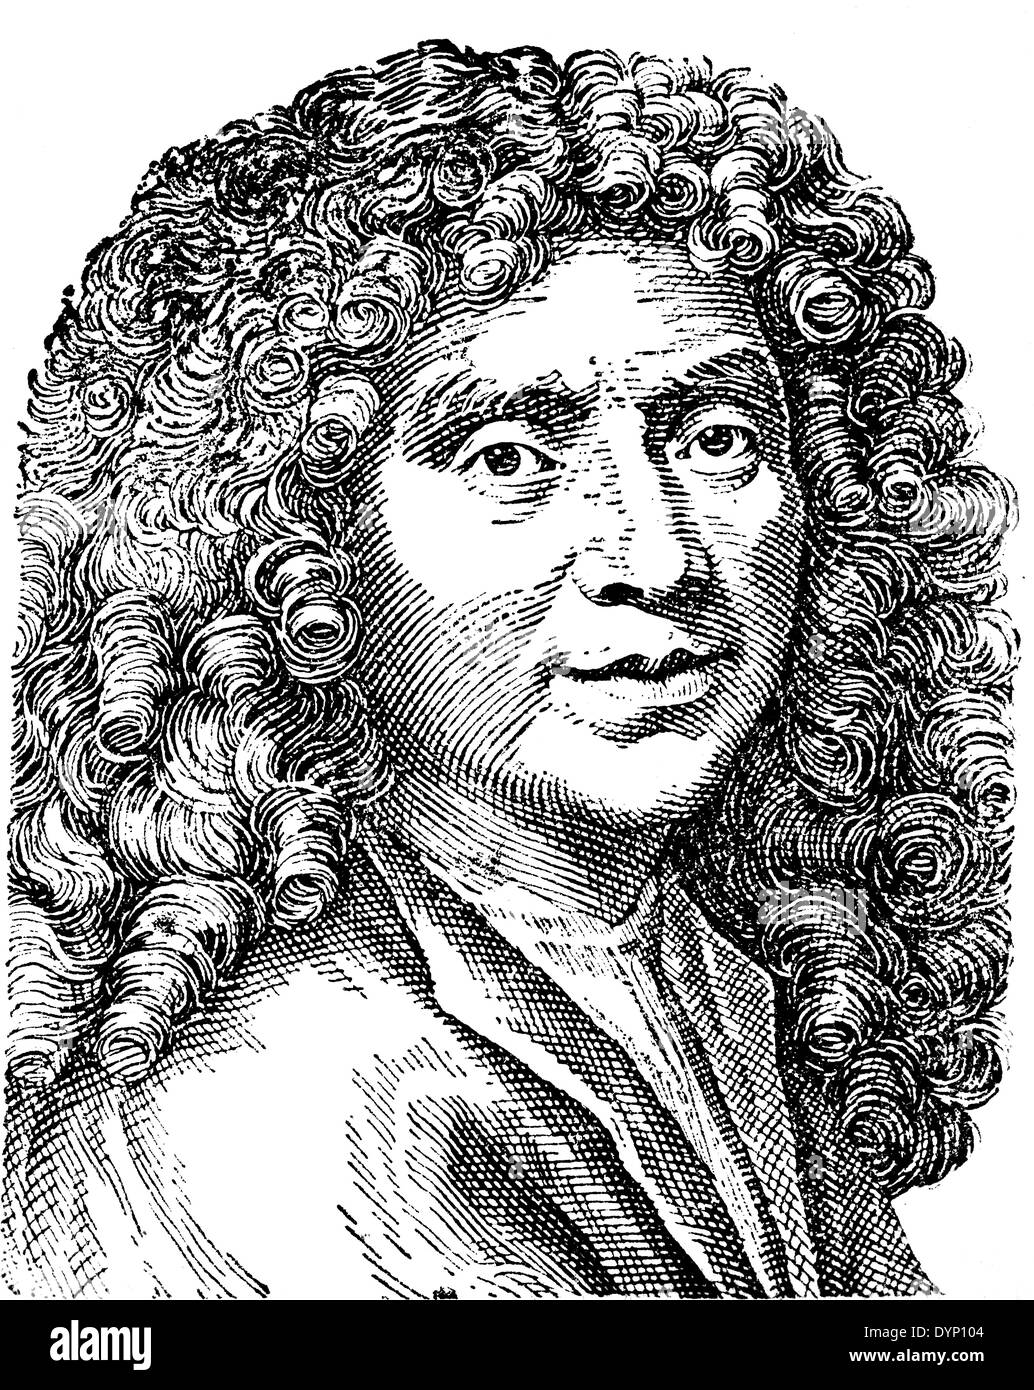 Jean-Baptiste Moliere (1622-1673), French playwright and actor, illustration from Soviet encyclopedia, 1938 Stock Photo